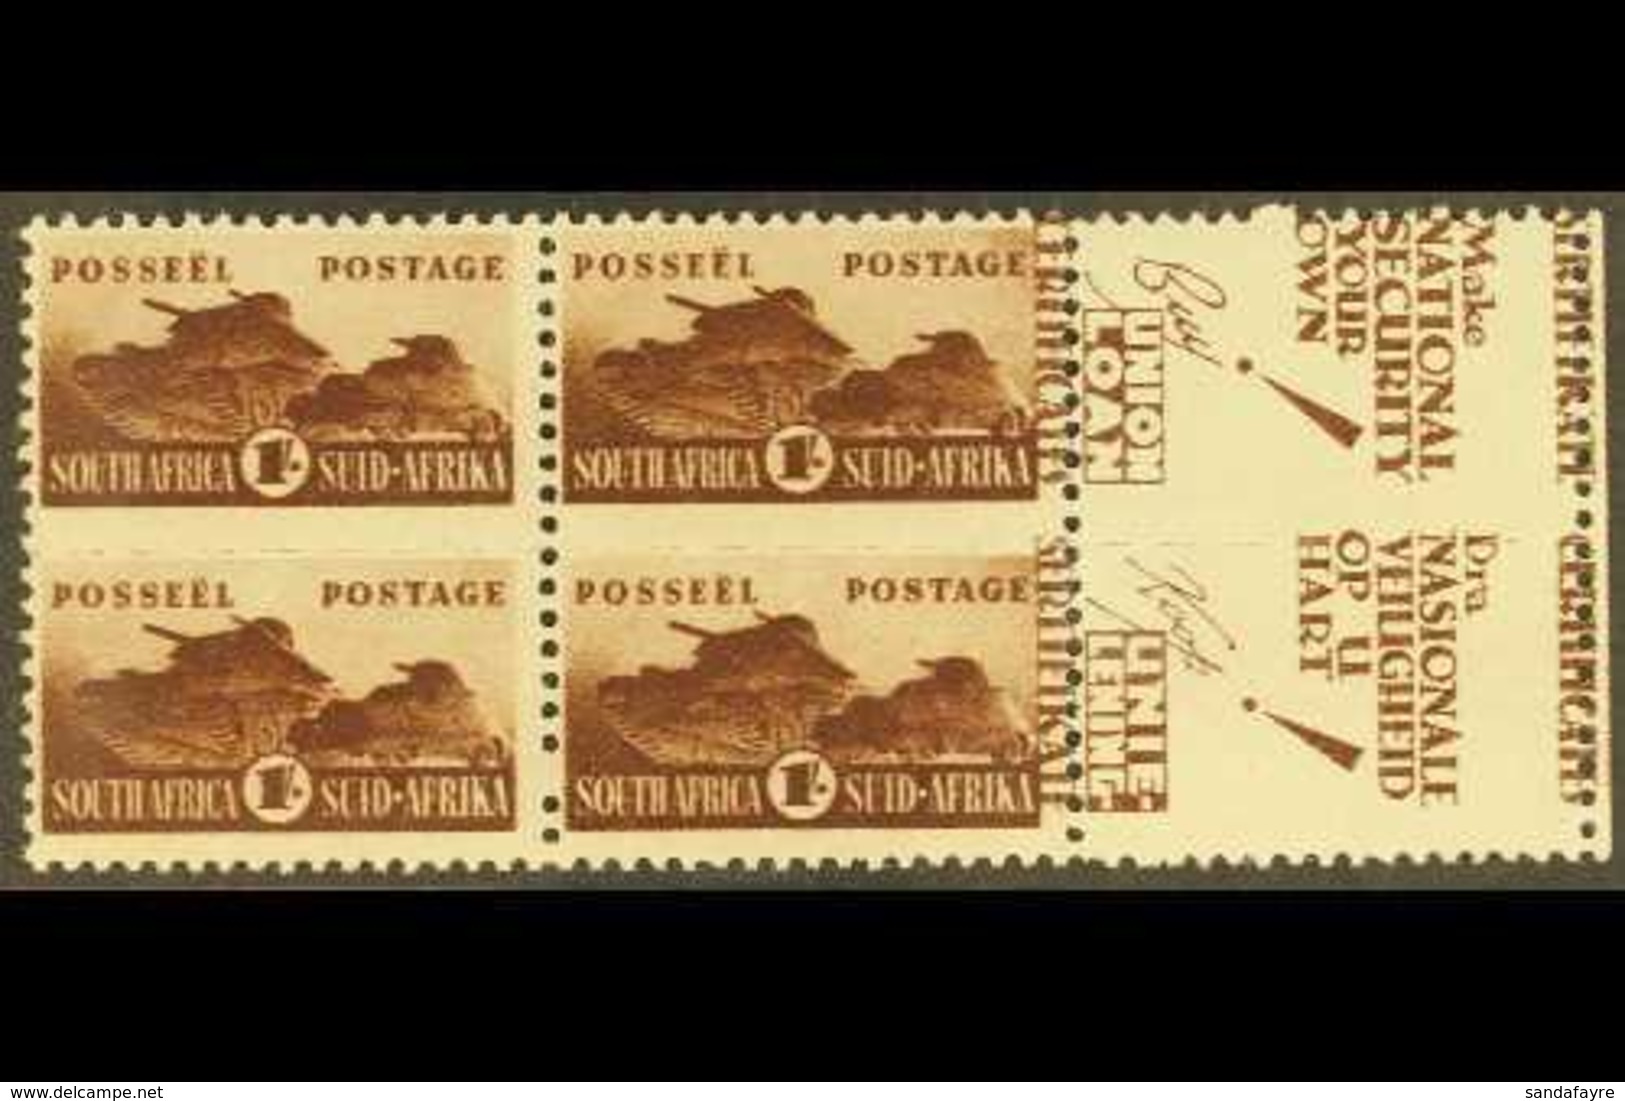 1942-4 1s Brown, Bantam War Effort, Right Marginal Block Of 4 (2 Units) With "CERTIFICATE" & "SERTIFIKATE" Printed On Th - Unclassified